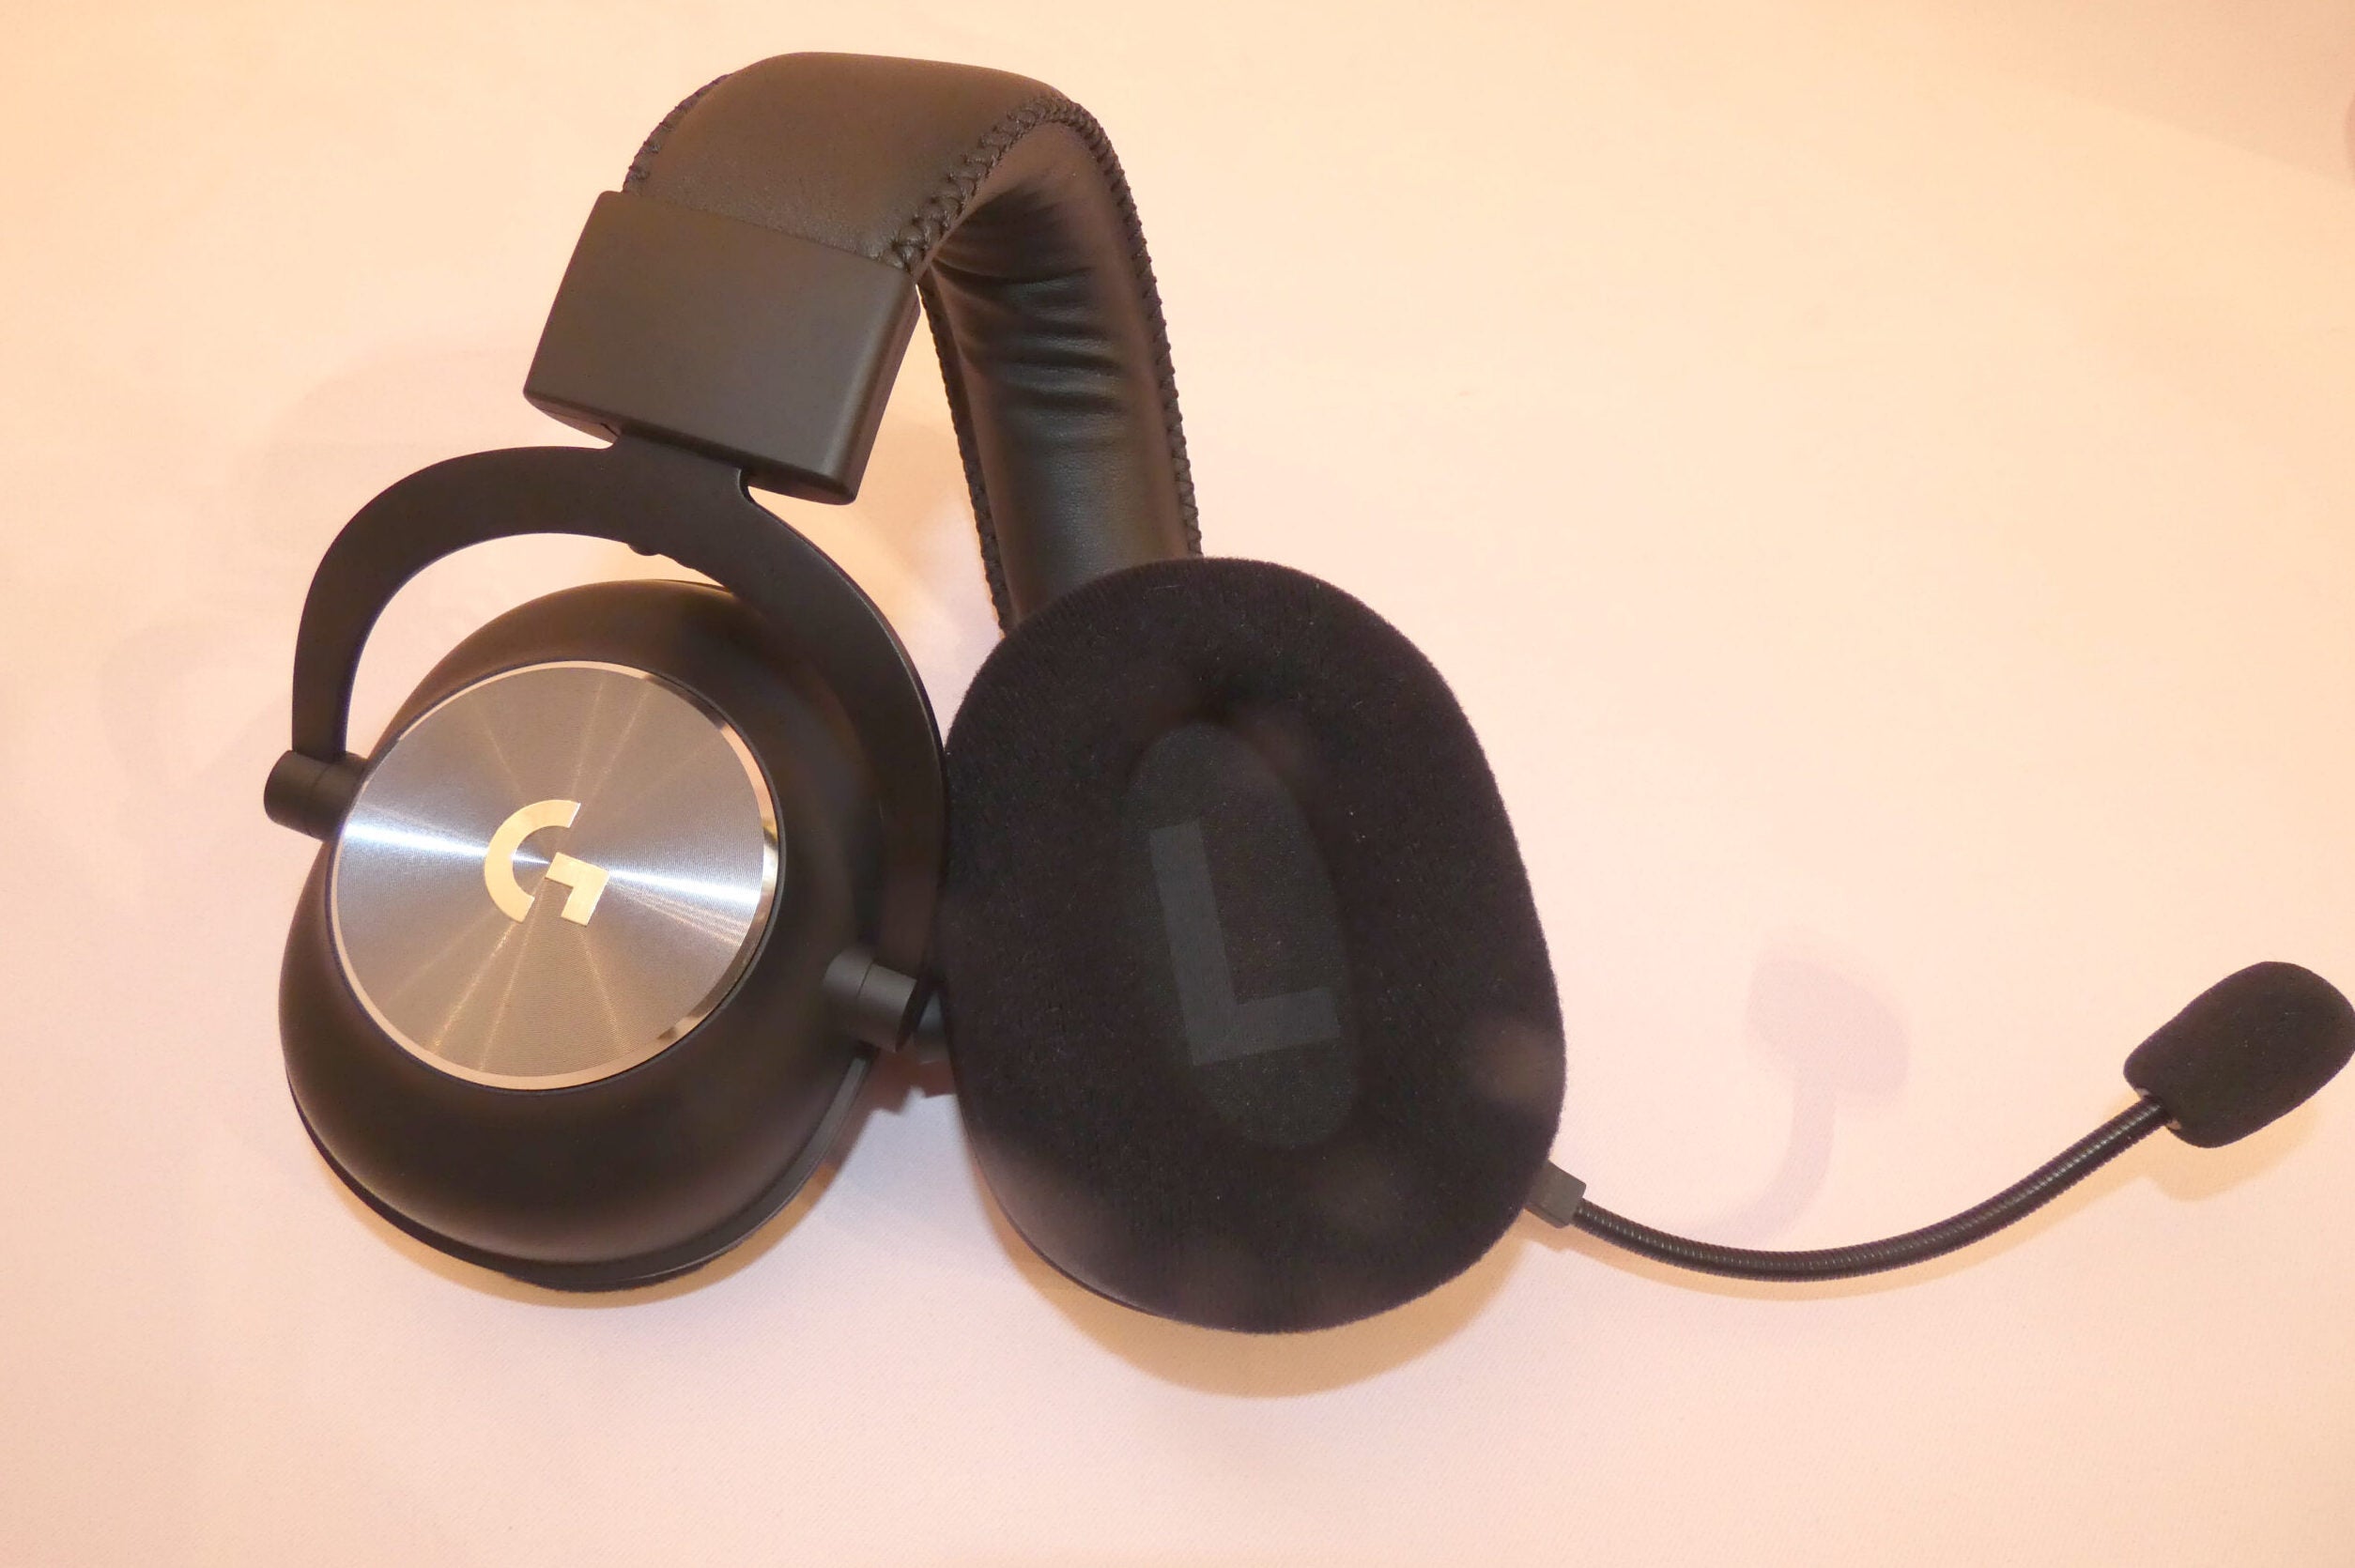 The headset's headband is a little too stiff, making it difficult to unclasp from your head Left and right earpad's view of a black G-Pro X wireless headphone, showing both front and back panels of an earpad